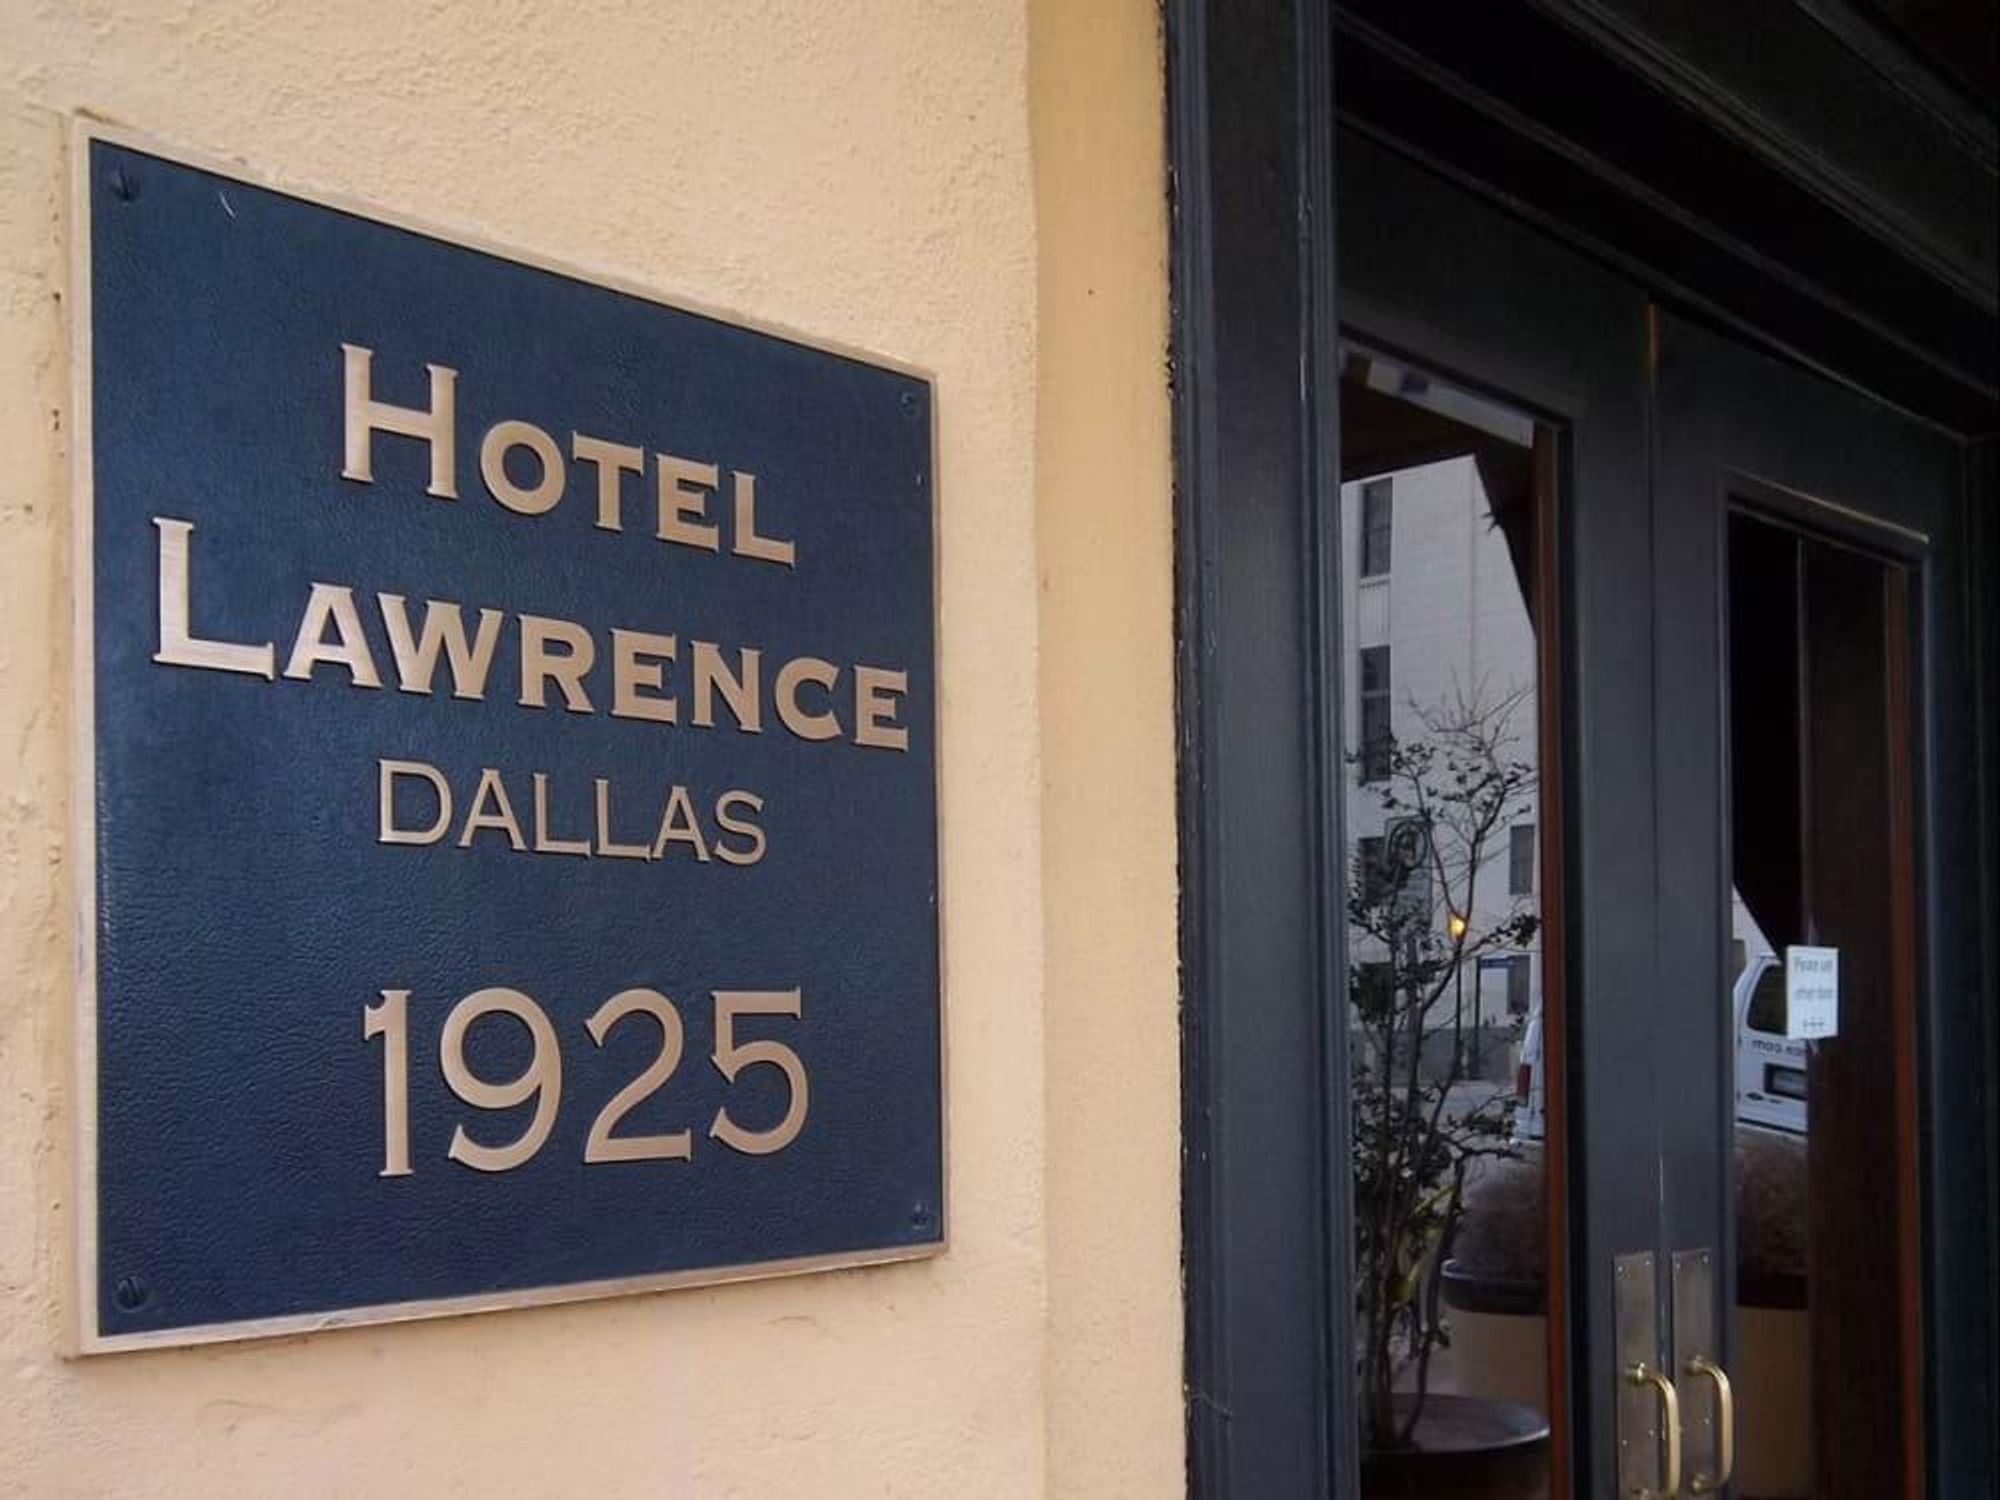 Hotel Lawrence, downtown Dallas